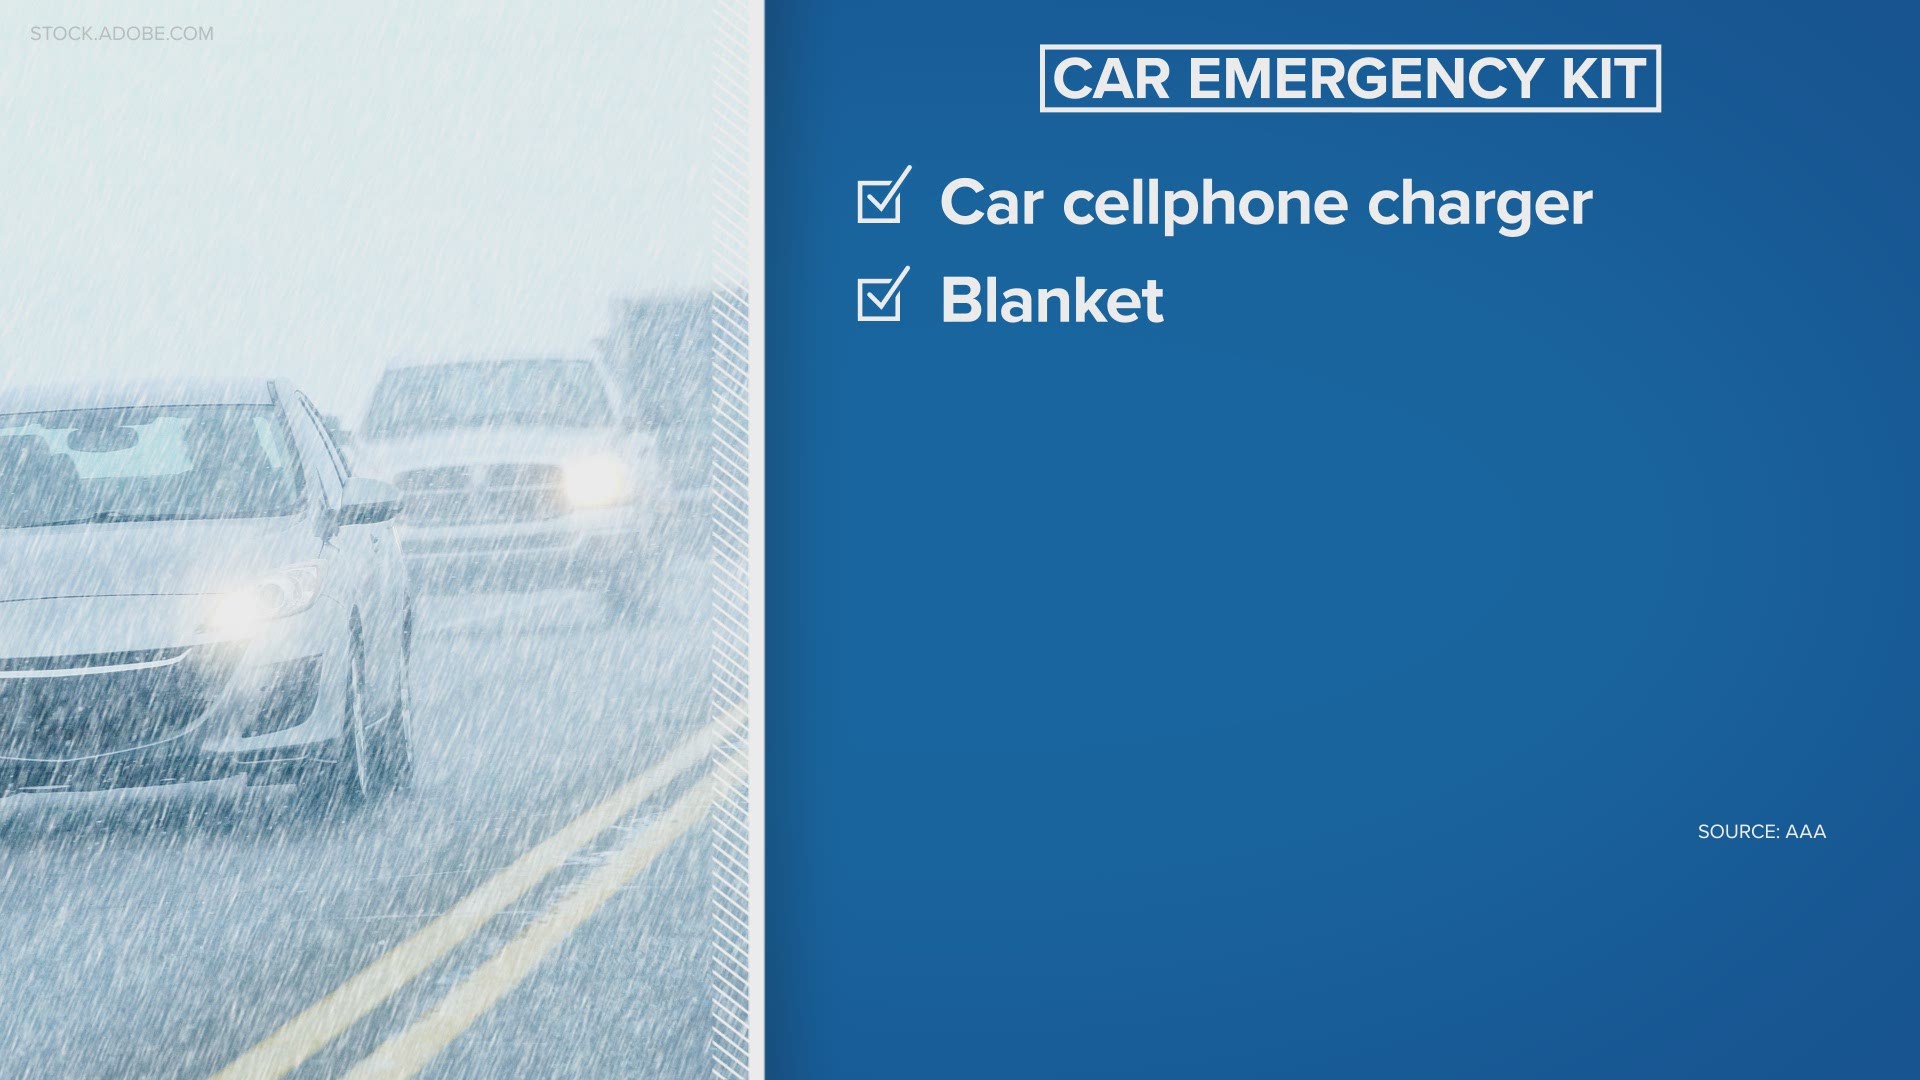 When you're driving in winter weather, make sure you've got an emergency kit riding with you.